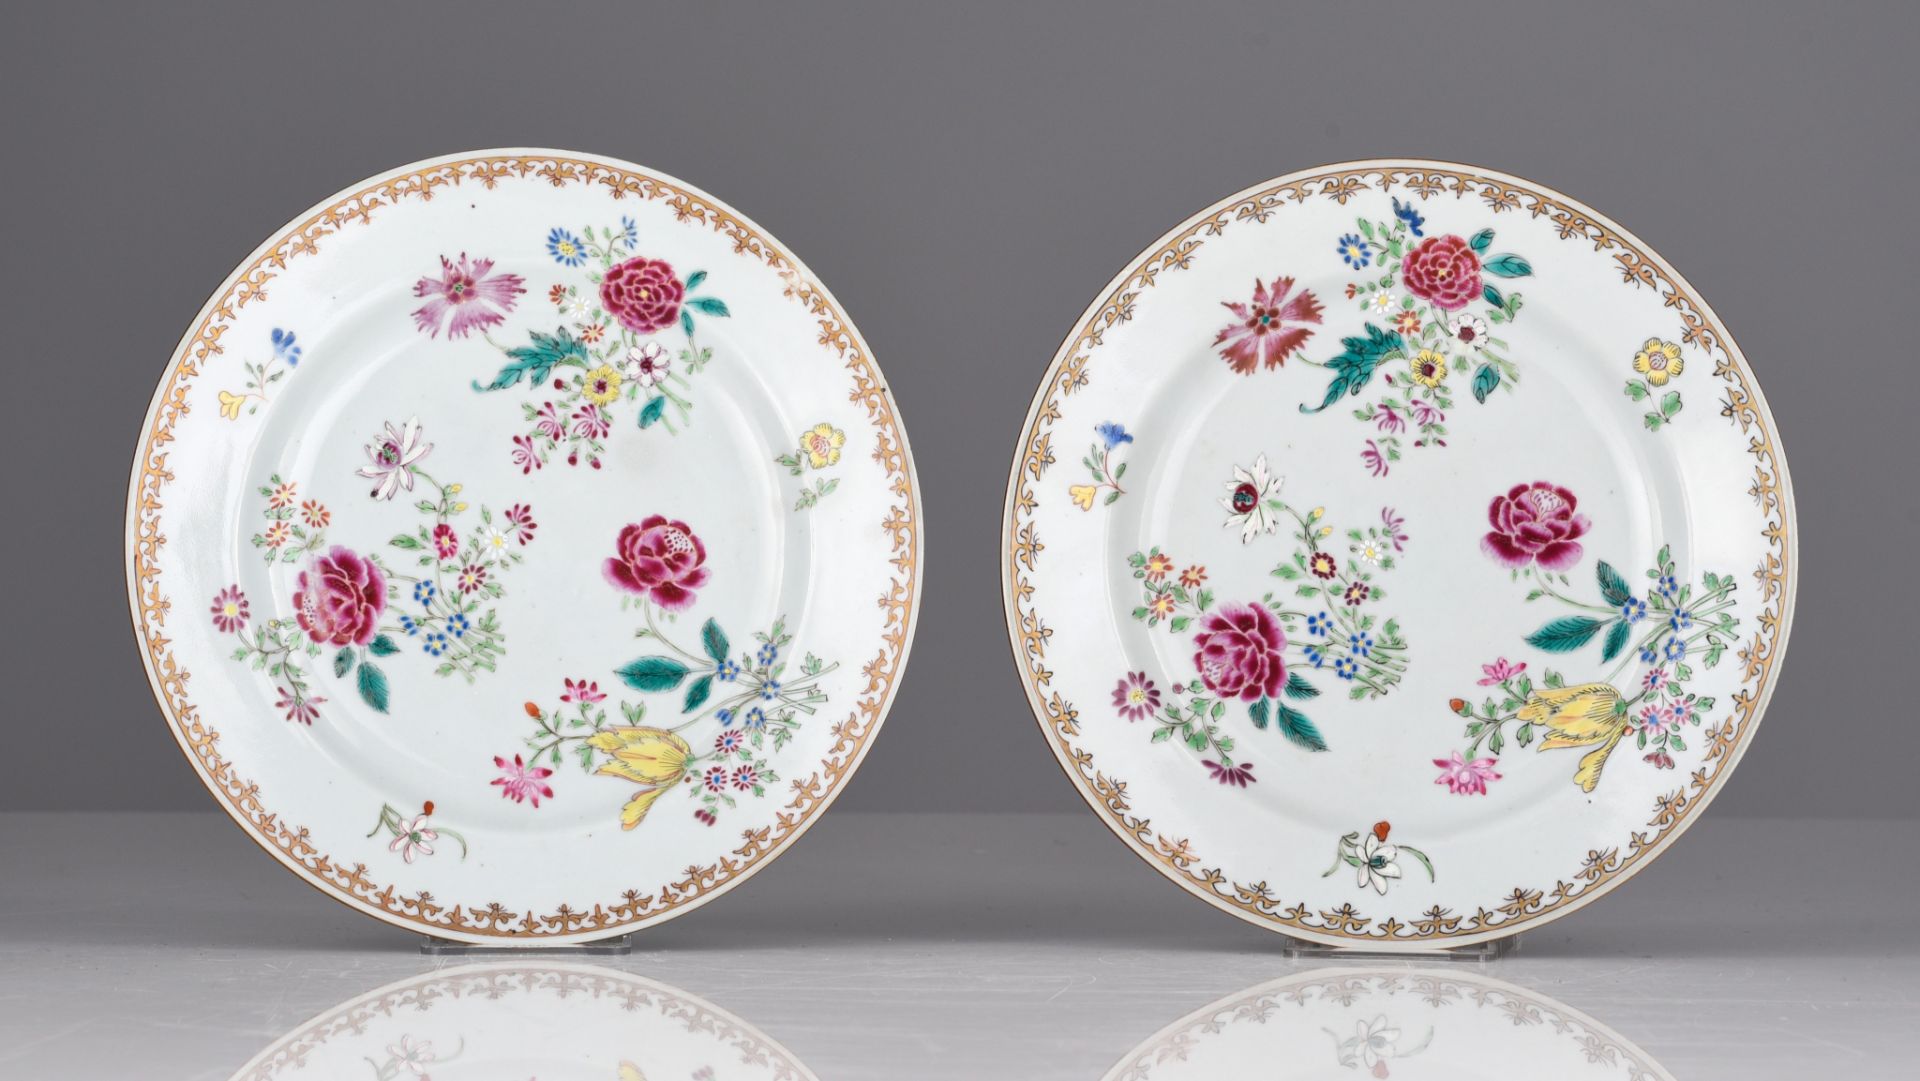 A collection of six Chinese famille rose export porcelain plates, 18thC, ¯ 23,5 cm - Image 6 of 10